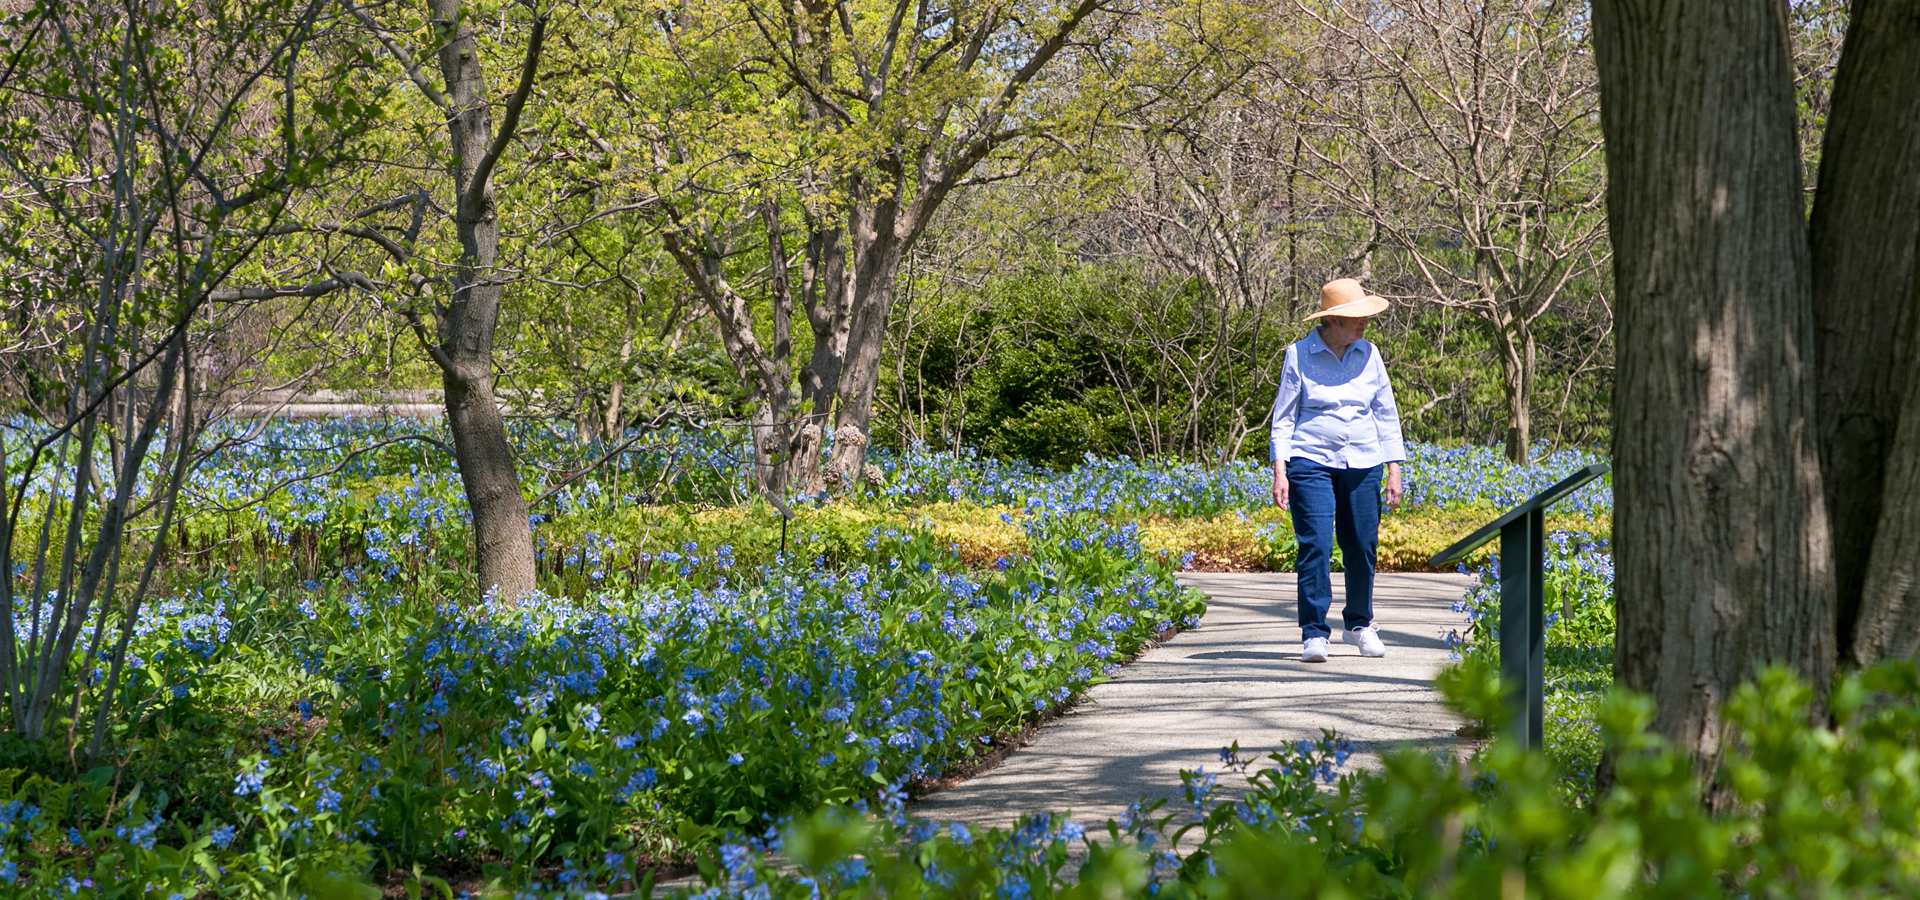 A woman in a sun hat strolls through the ground cover garden that is covered in bluebells